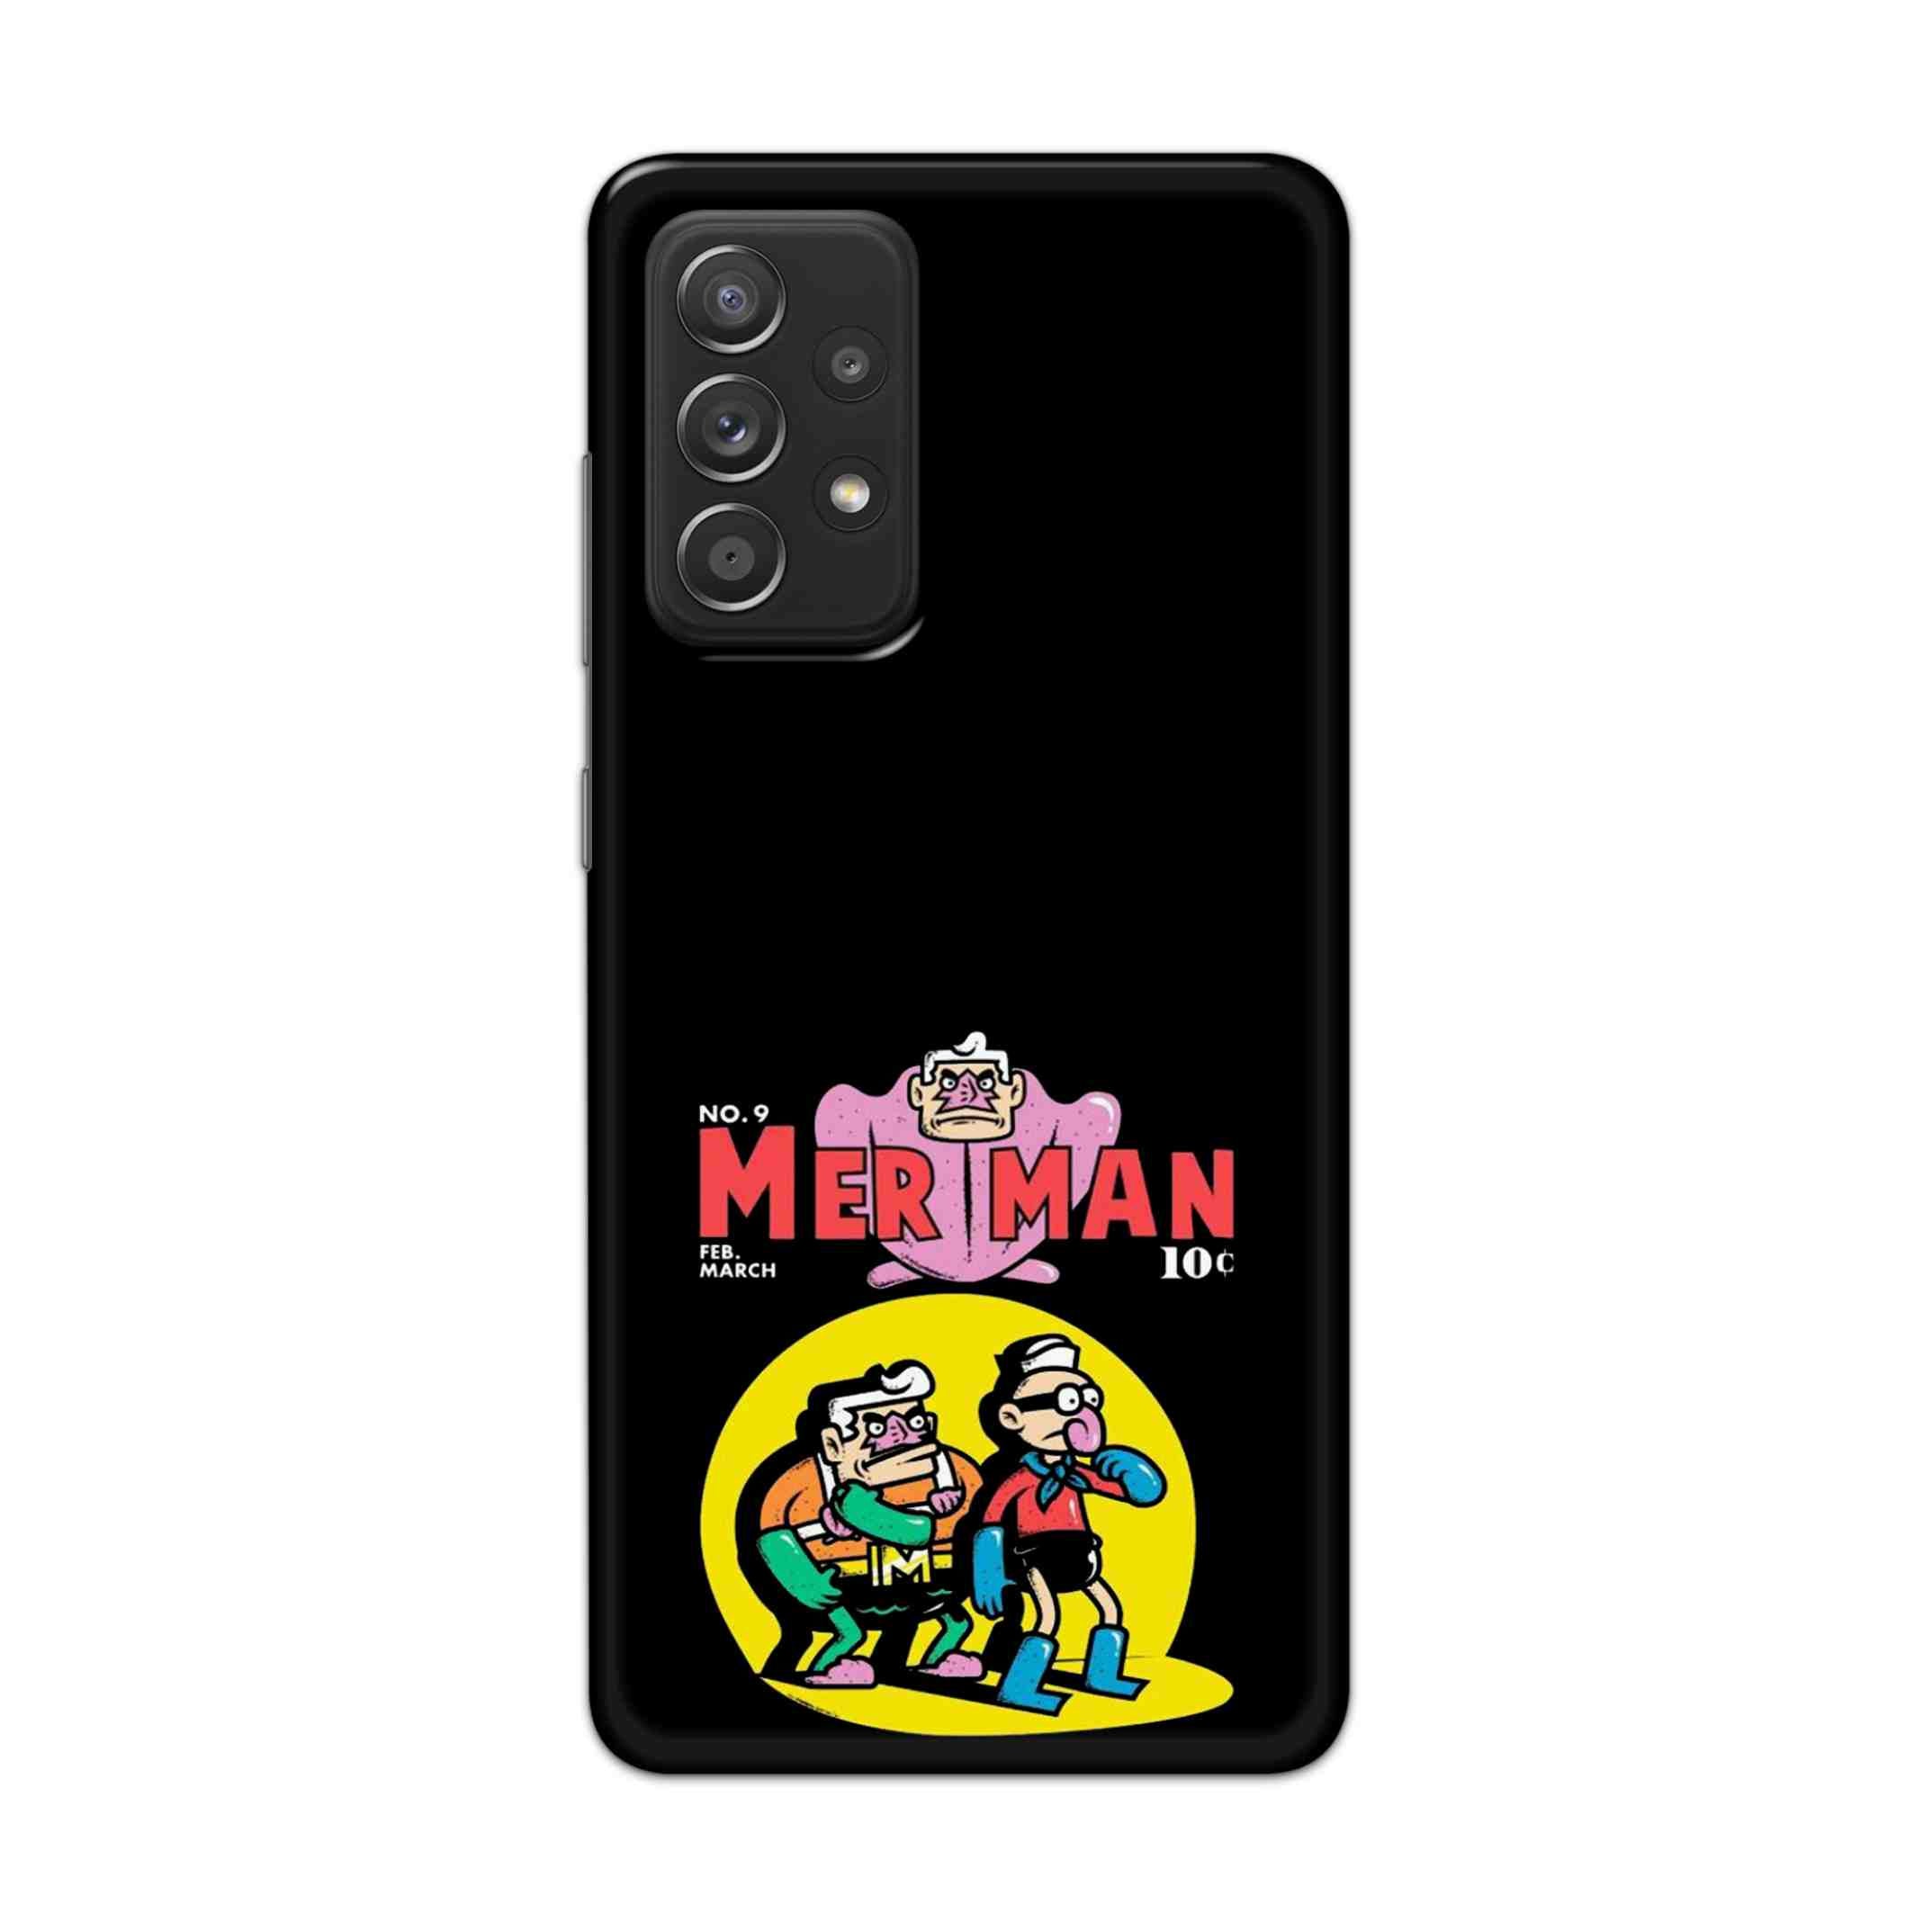 Buy Merman Hard Back Mobile Phone Case Cover For Samsung Galaxy A52 Online